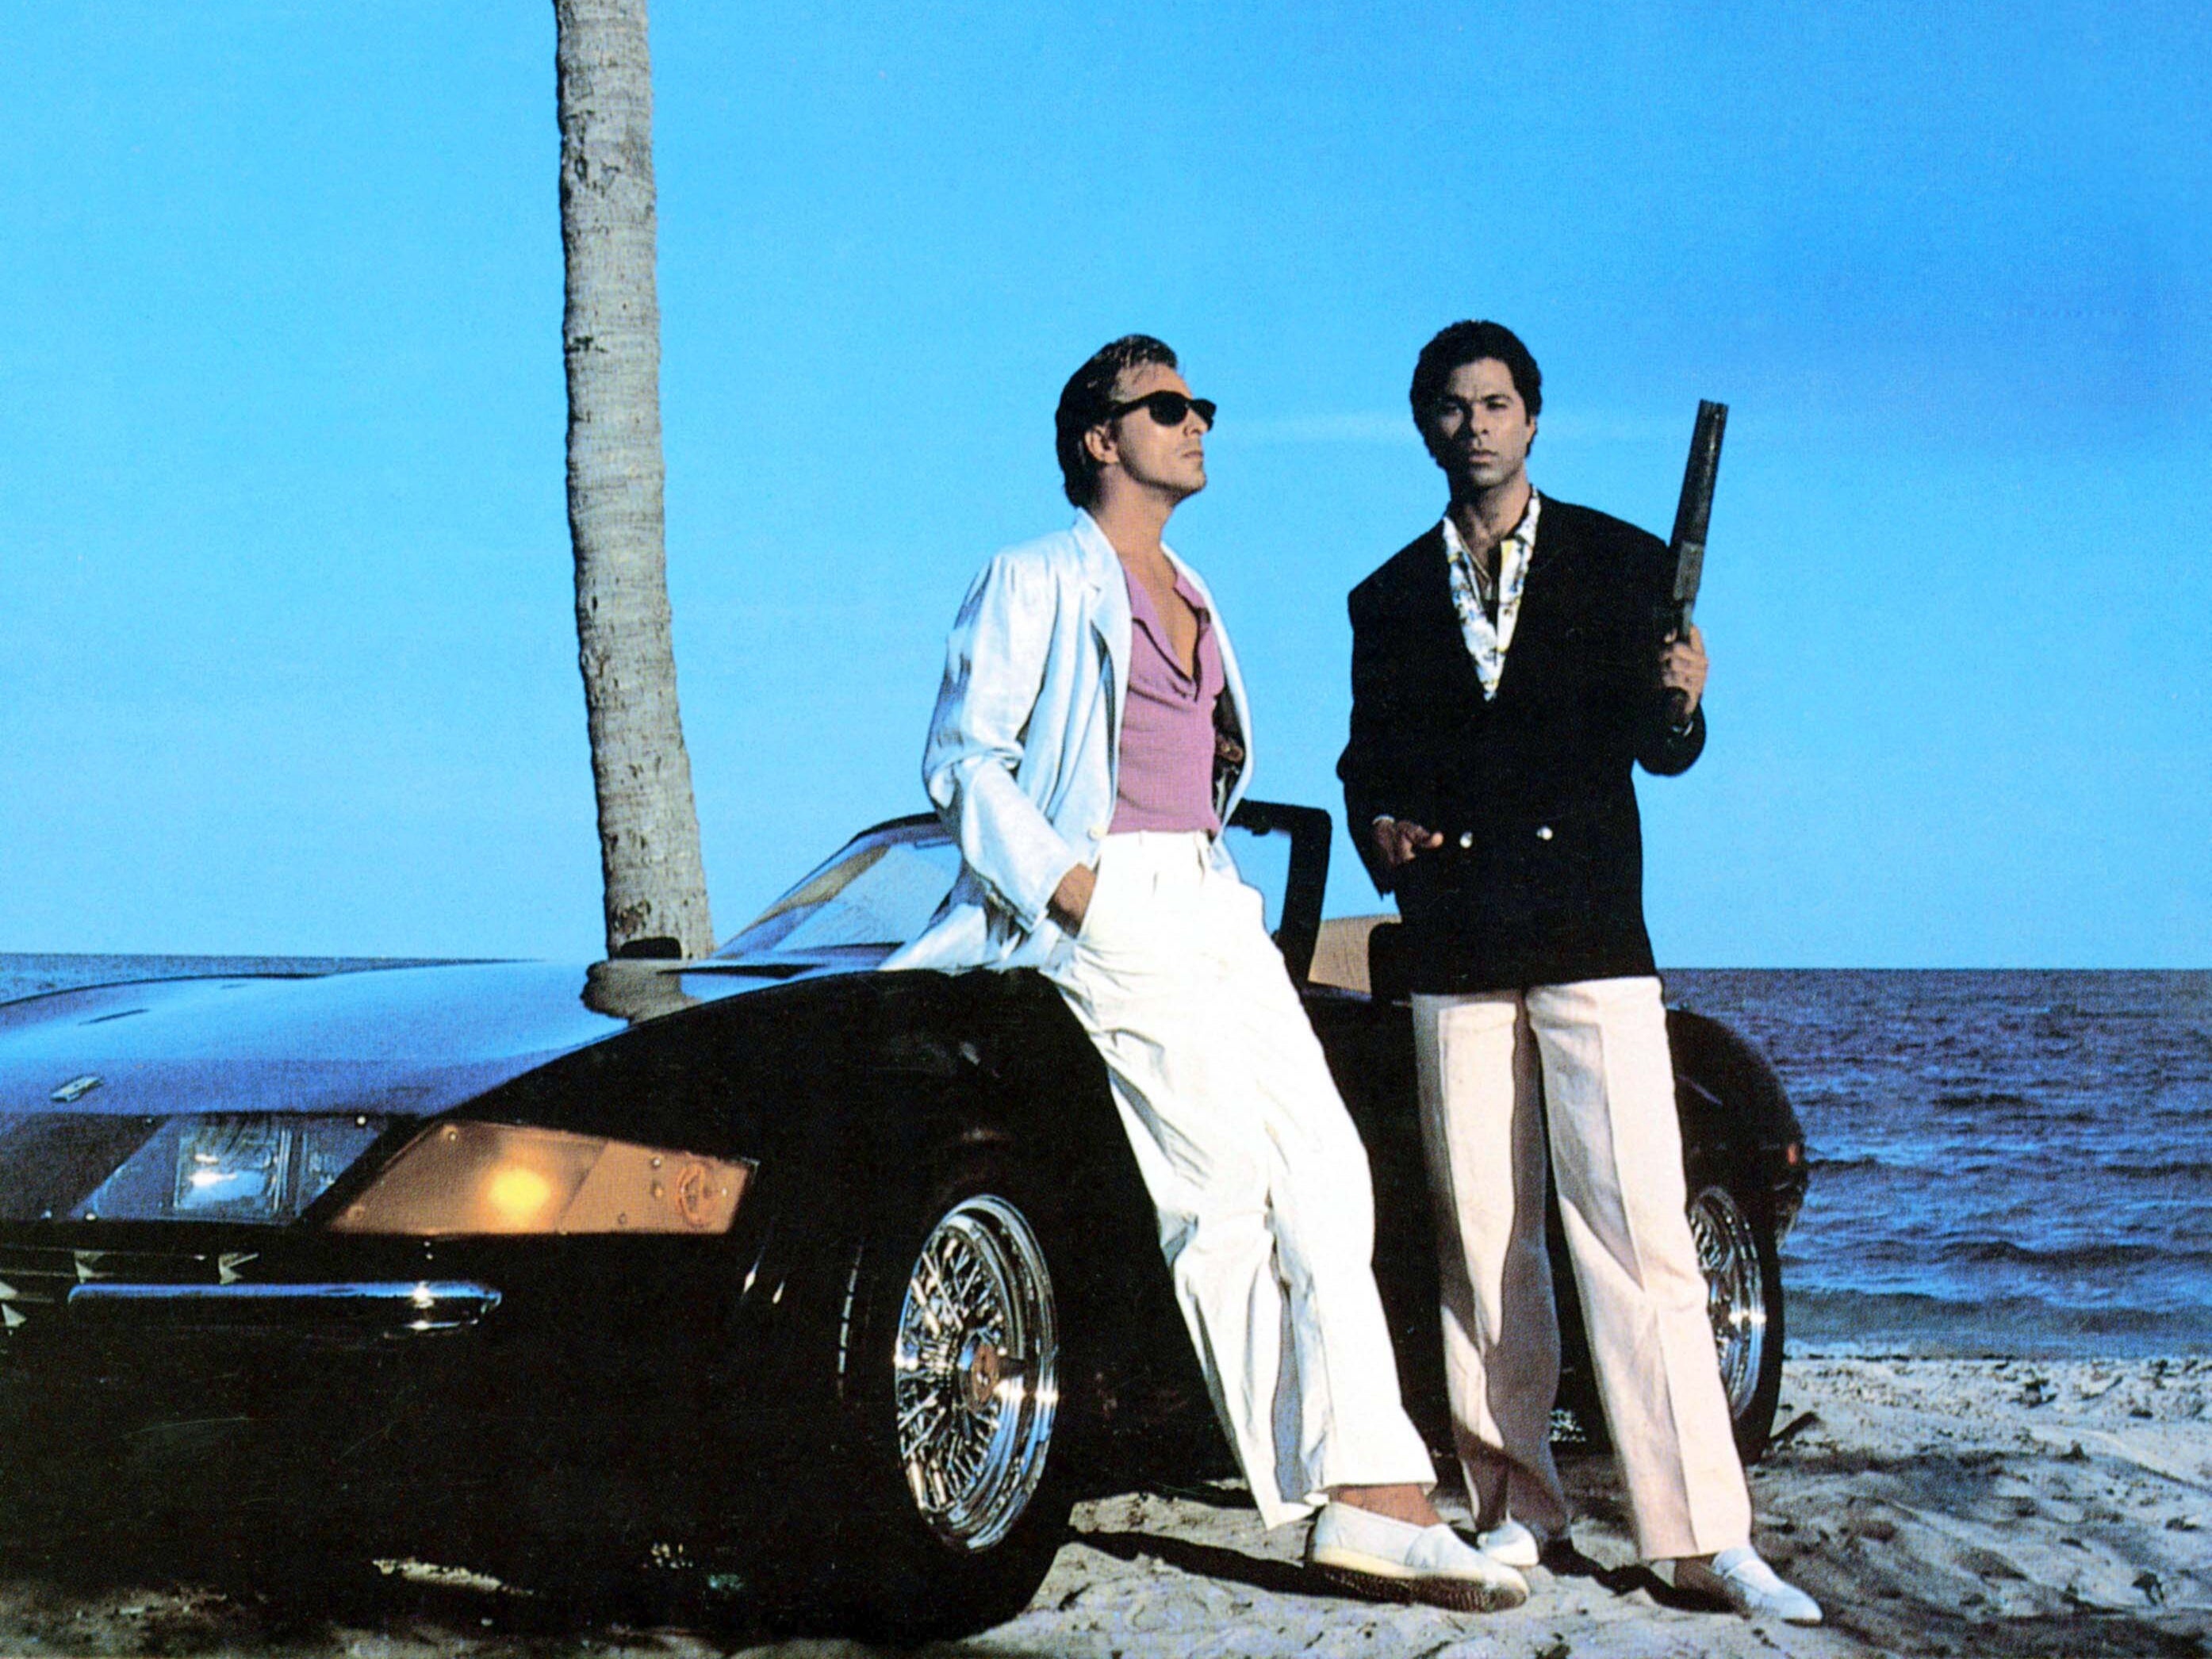 Miami Vice was more than just a popular cop show - it left a